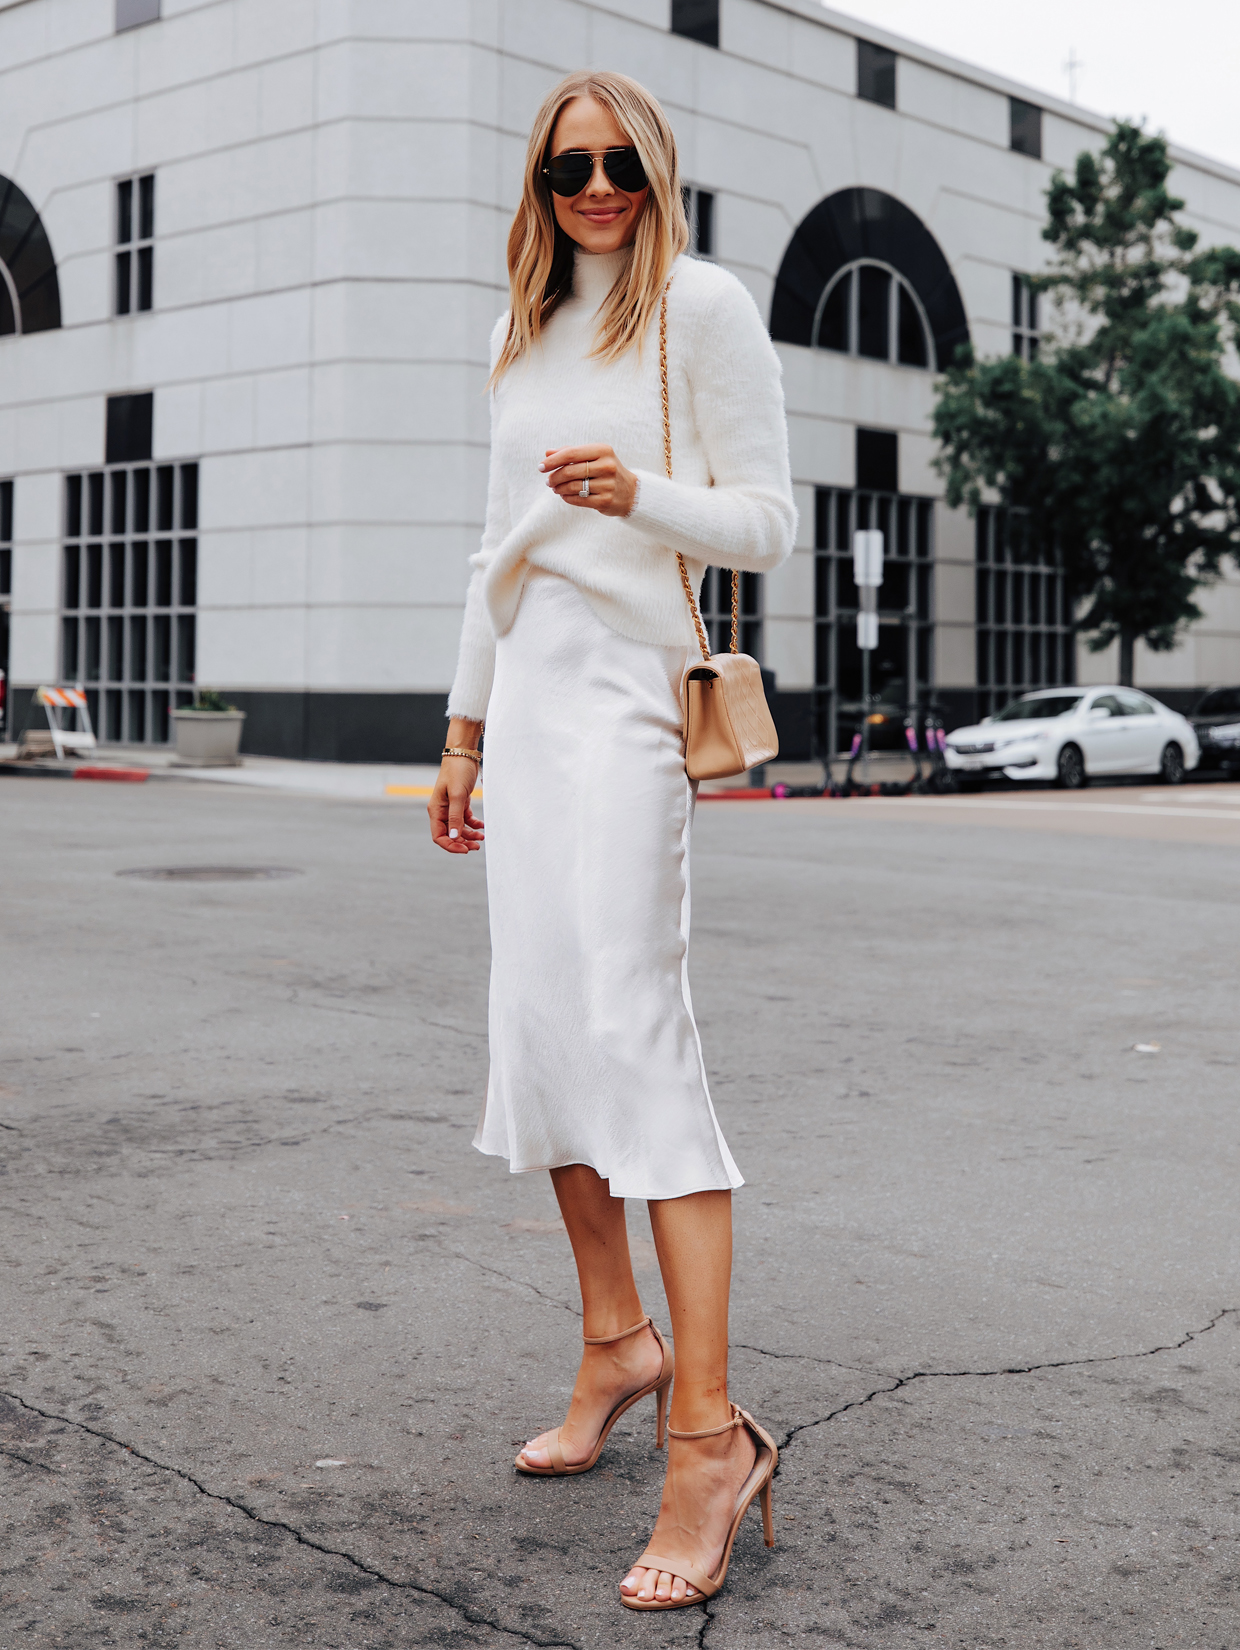 Winter White Outfit Idea For a Casual Holiday Party - Fashion Jackson